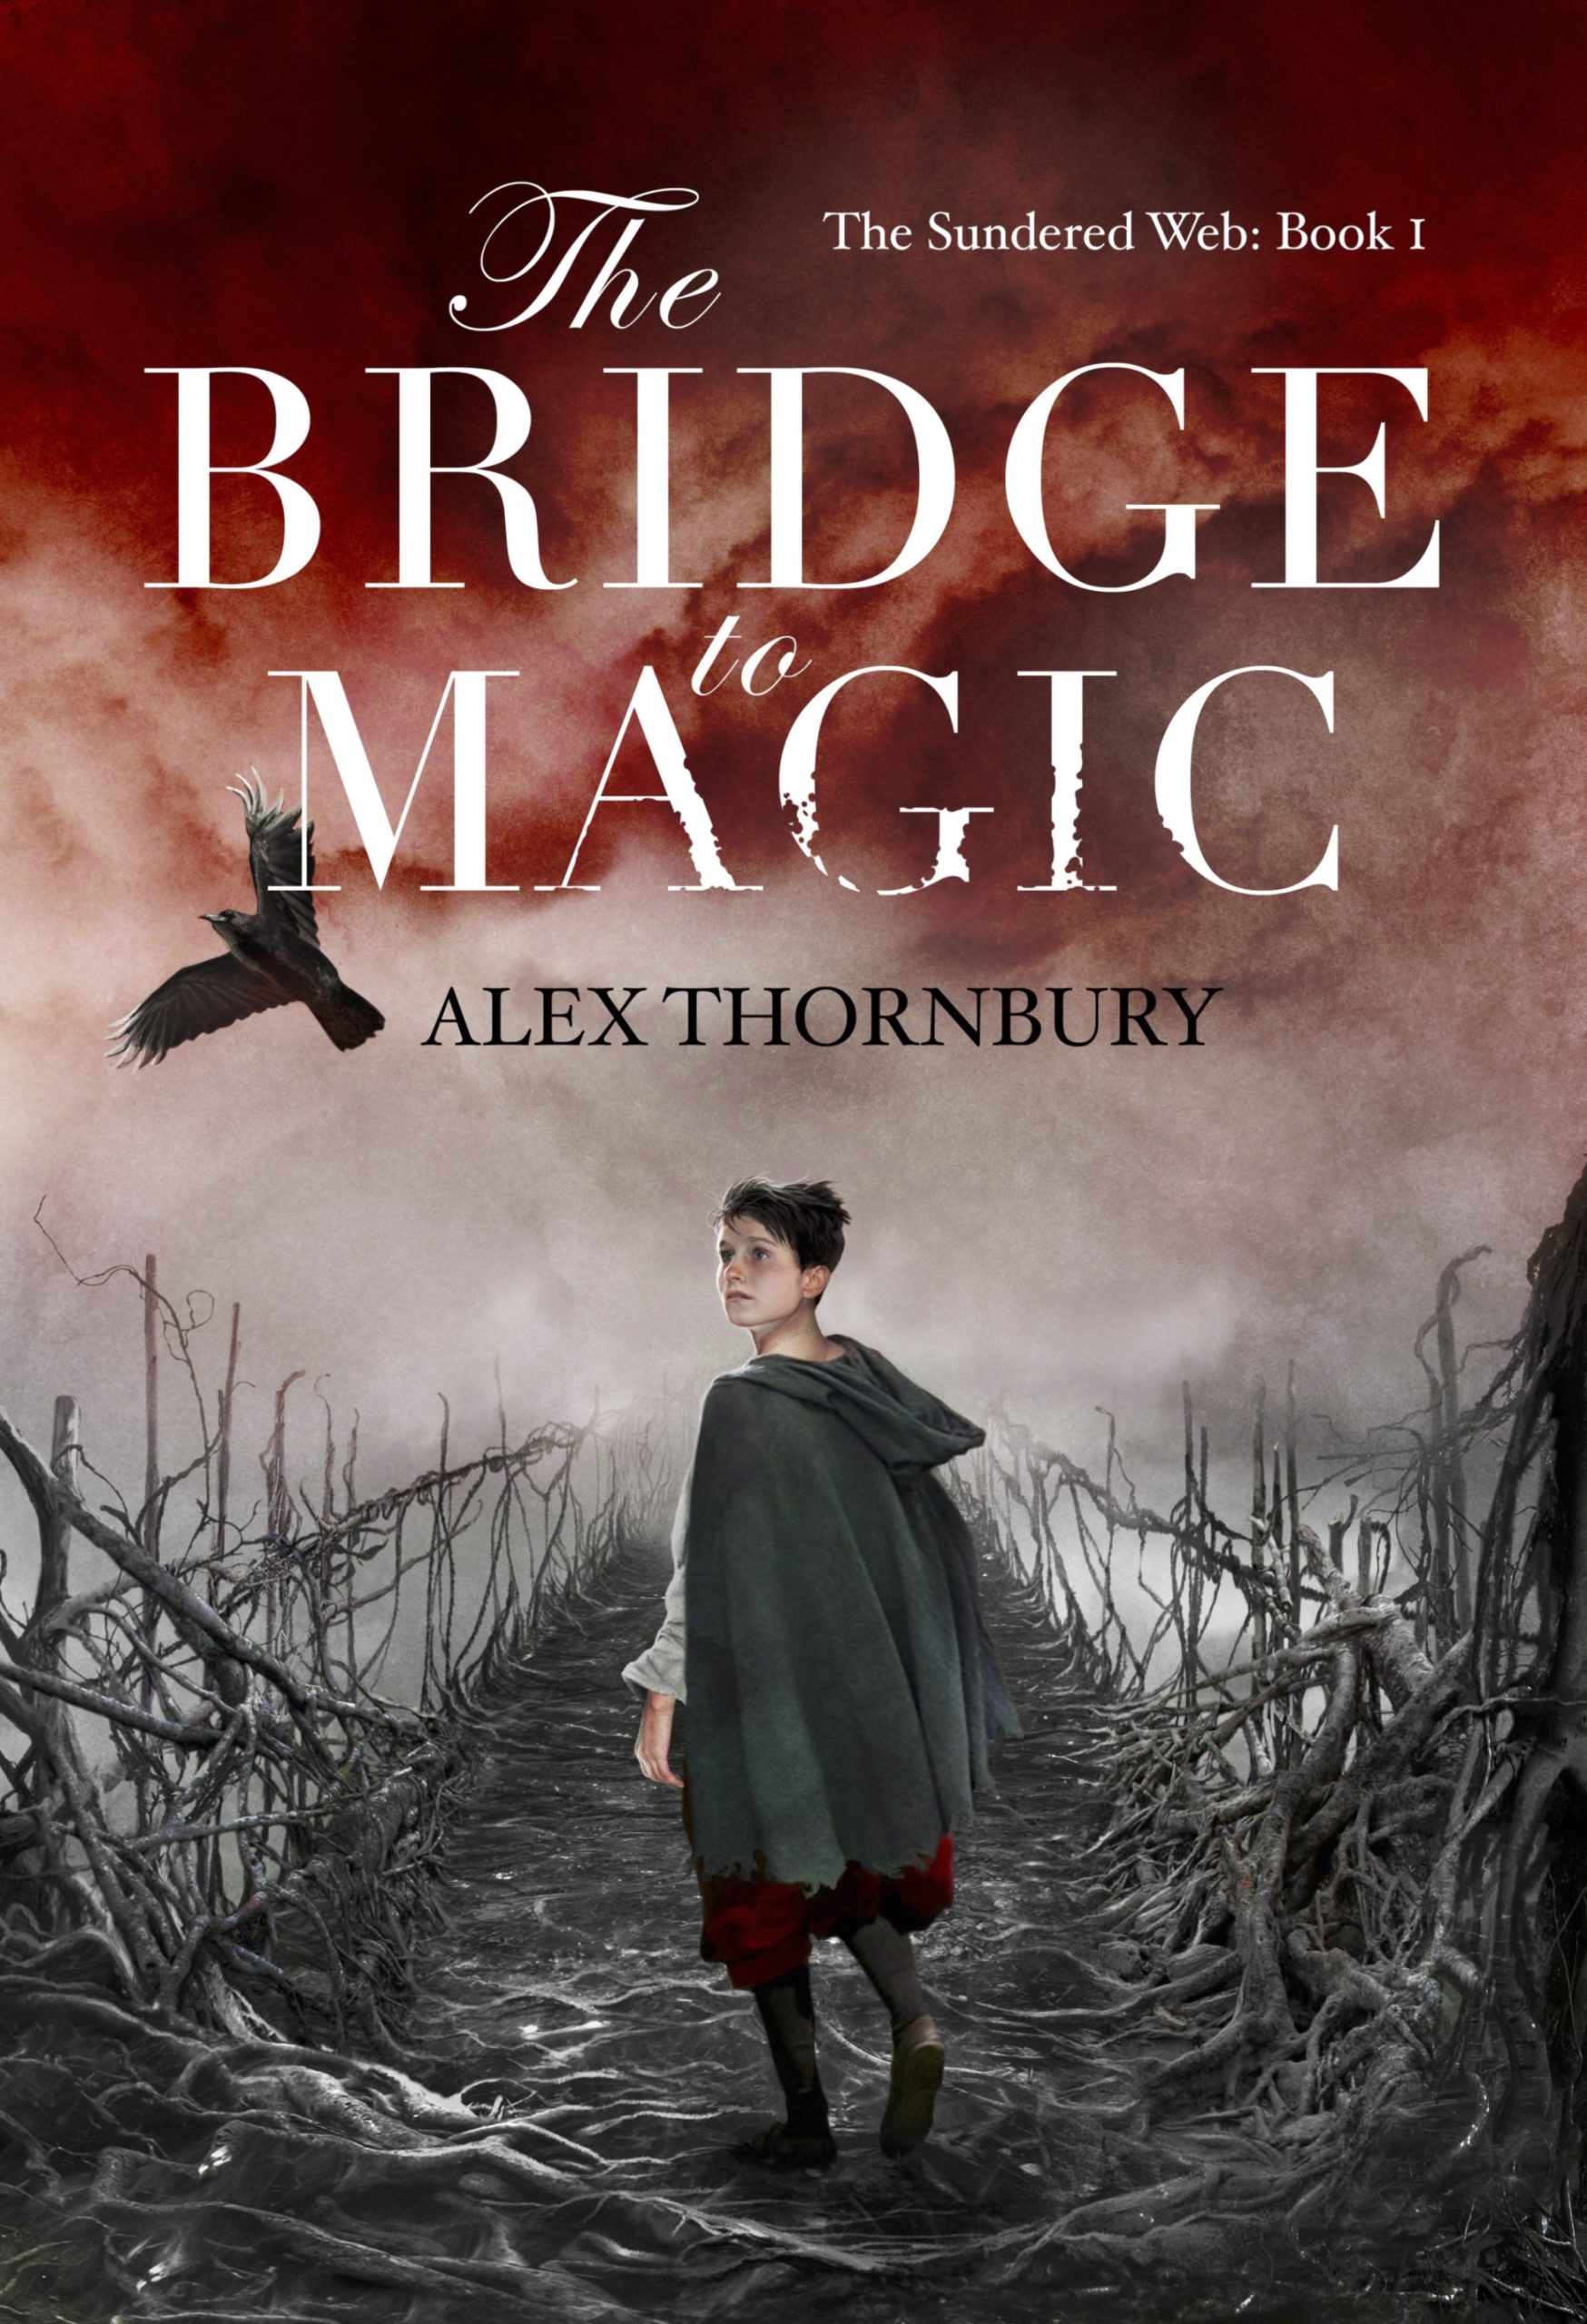 Spotlight on The Bridge to Magic (Alex Thornbury), Excerpt Plus Giveaway! ~US/CAN Only